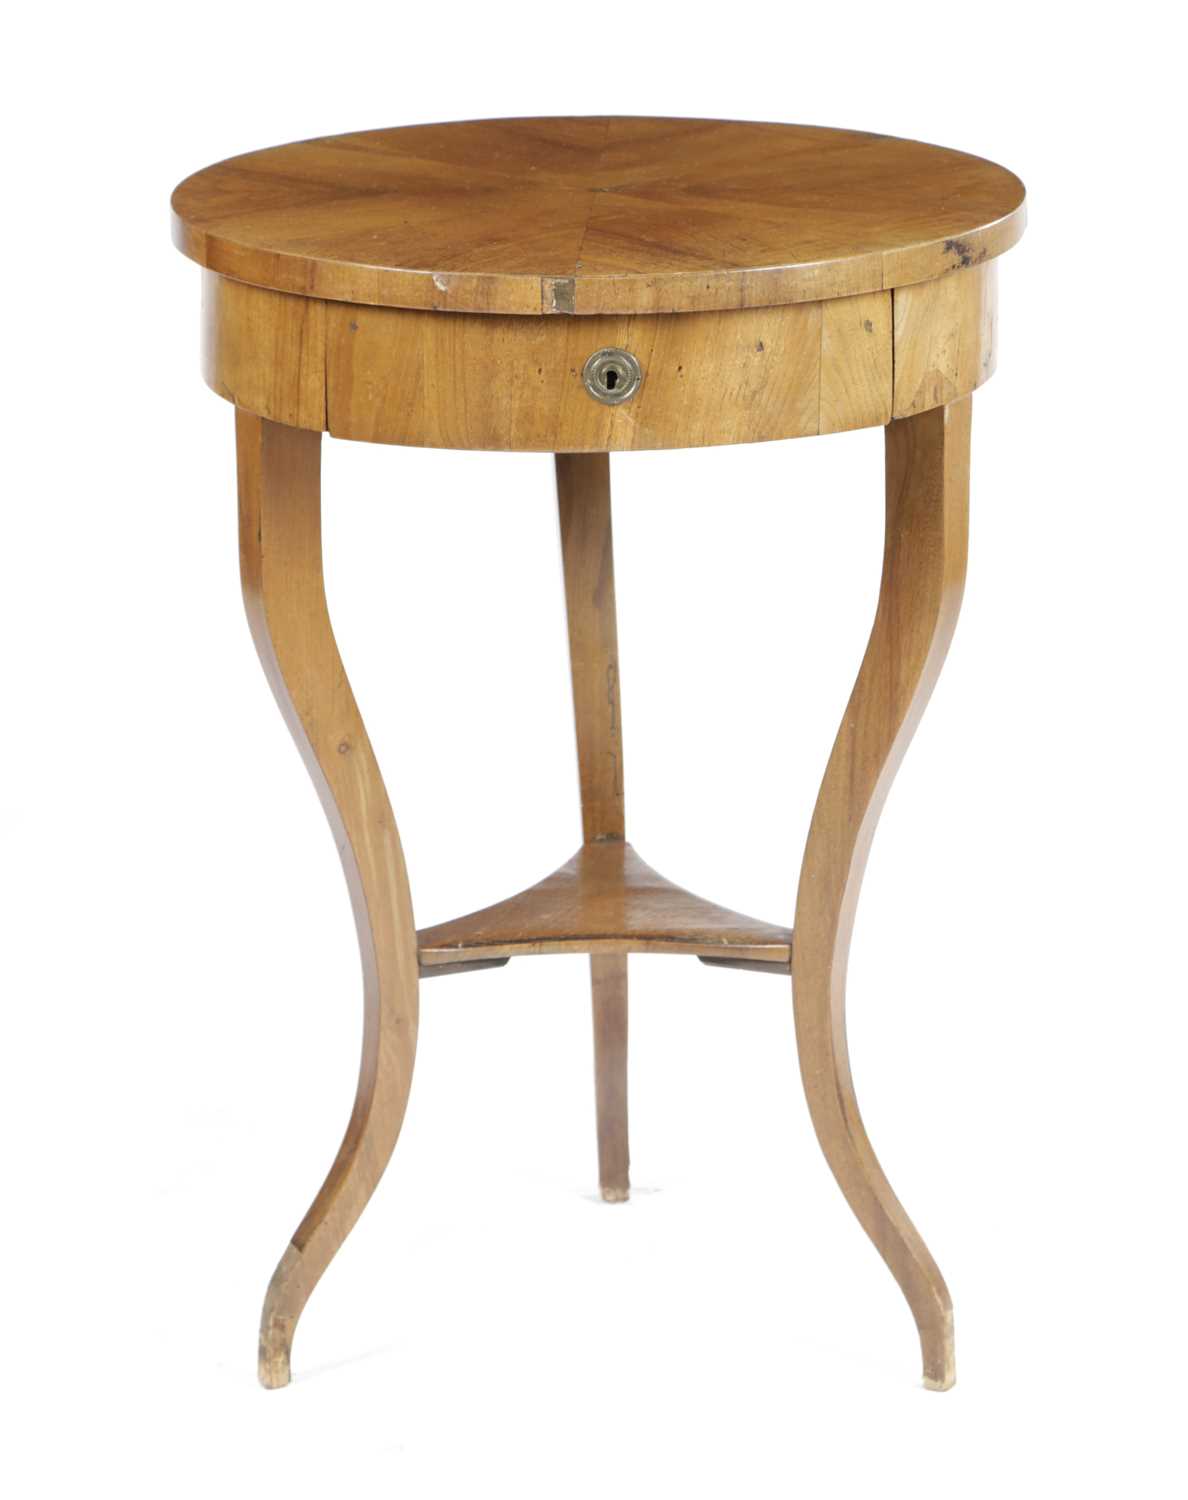 AN ITALIAN WALNUT LAMP TABLE EARLY 19TH CENTURY the circular top with segmented veneers above a